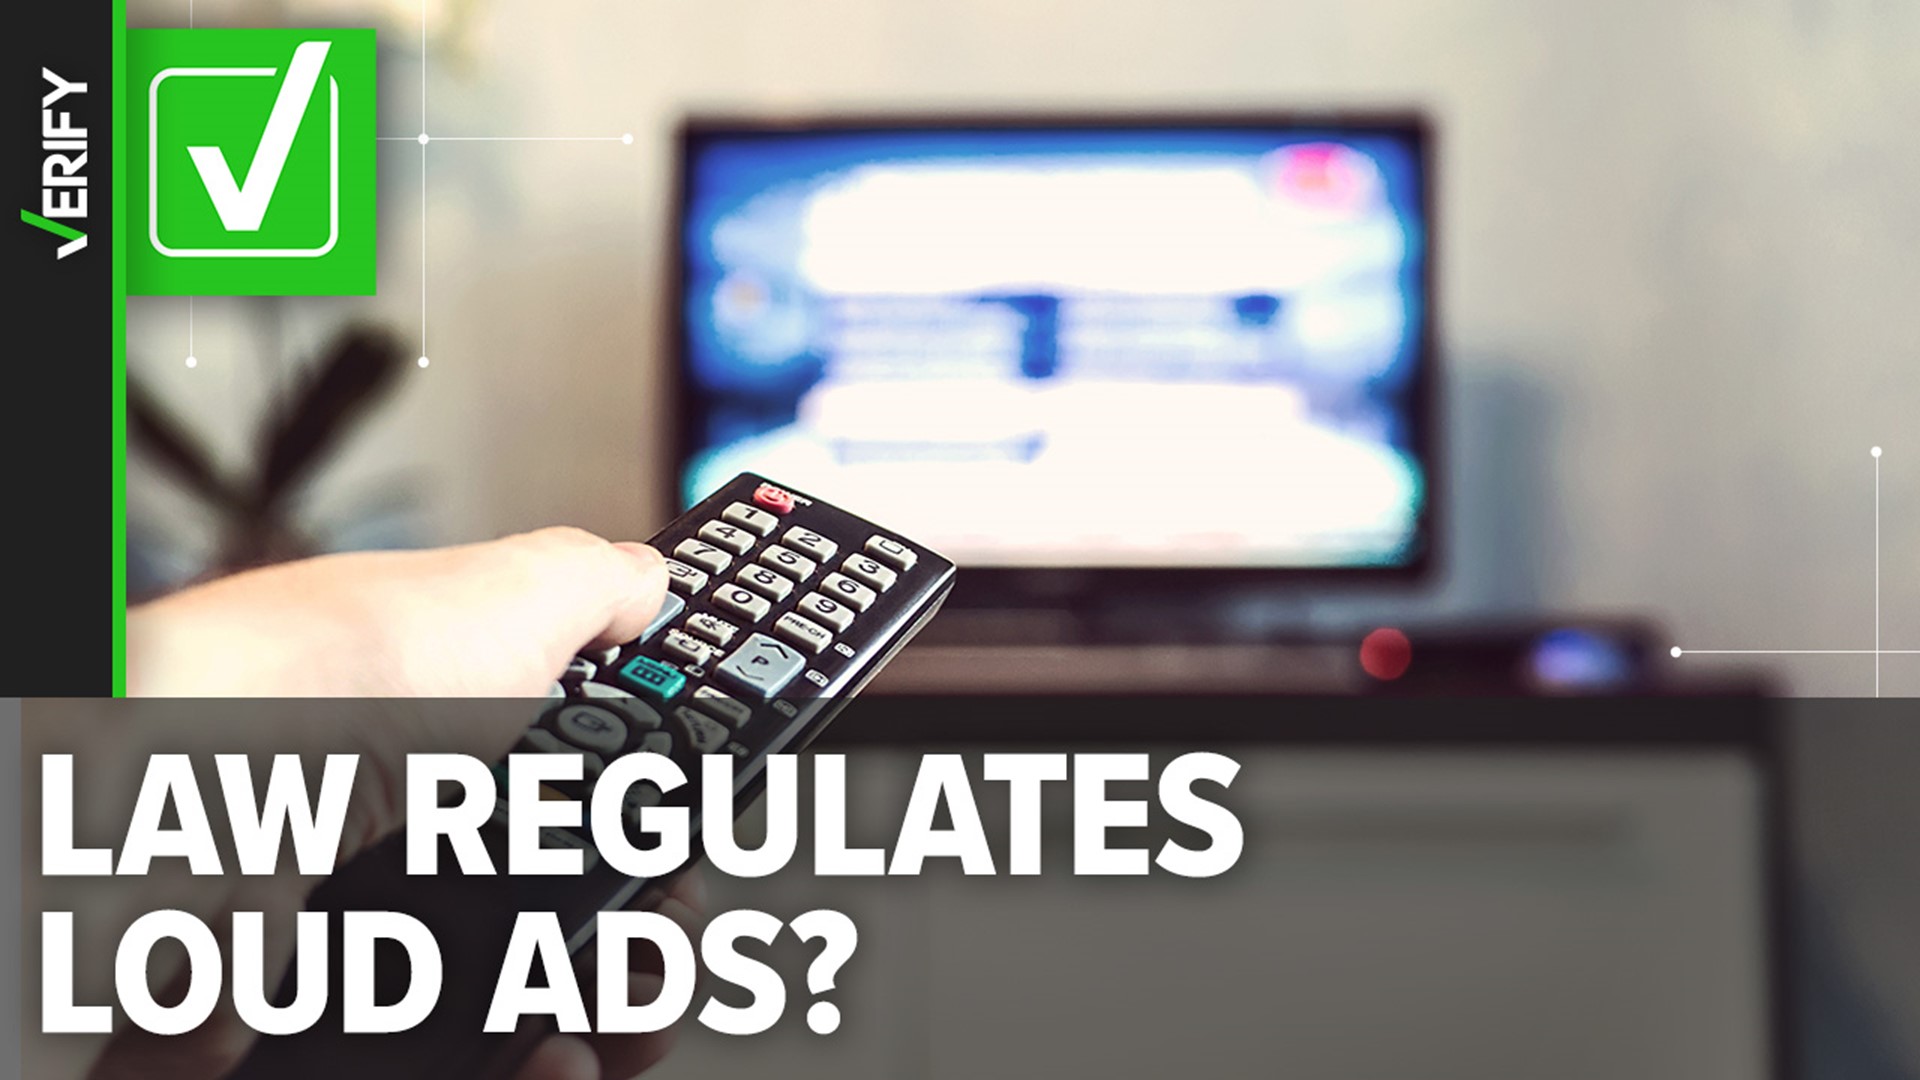 The CALM Act bans the audio of TV commercials from being louder than the average volume of the program. Here’s what to do if the ads on your TV are too loud.